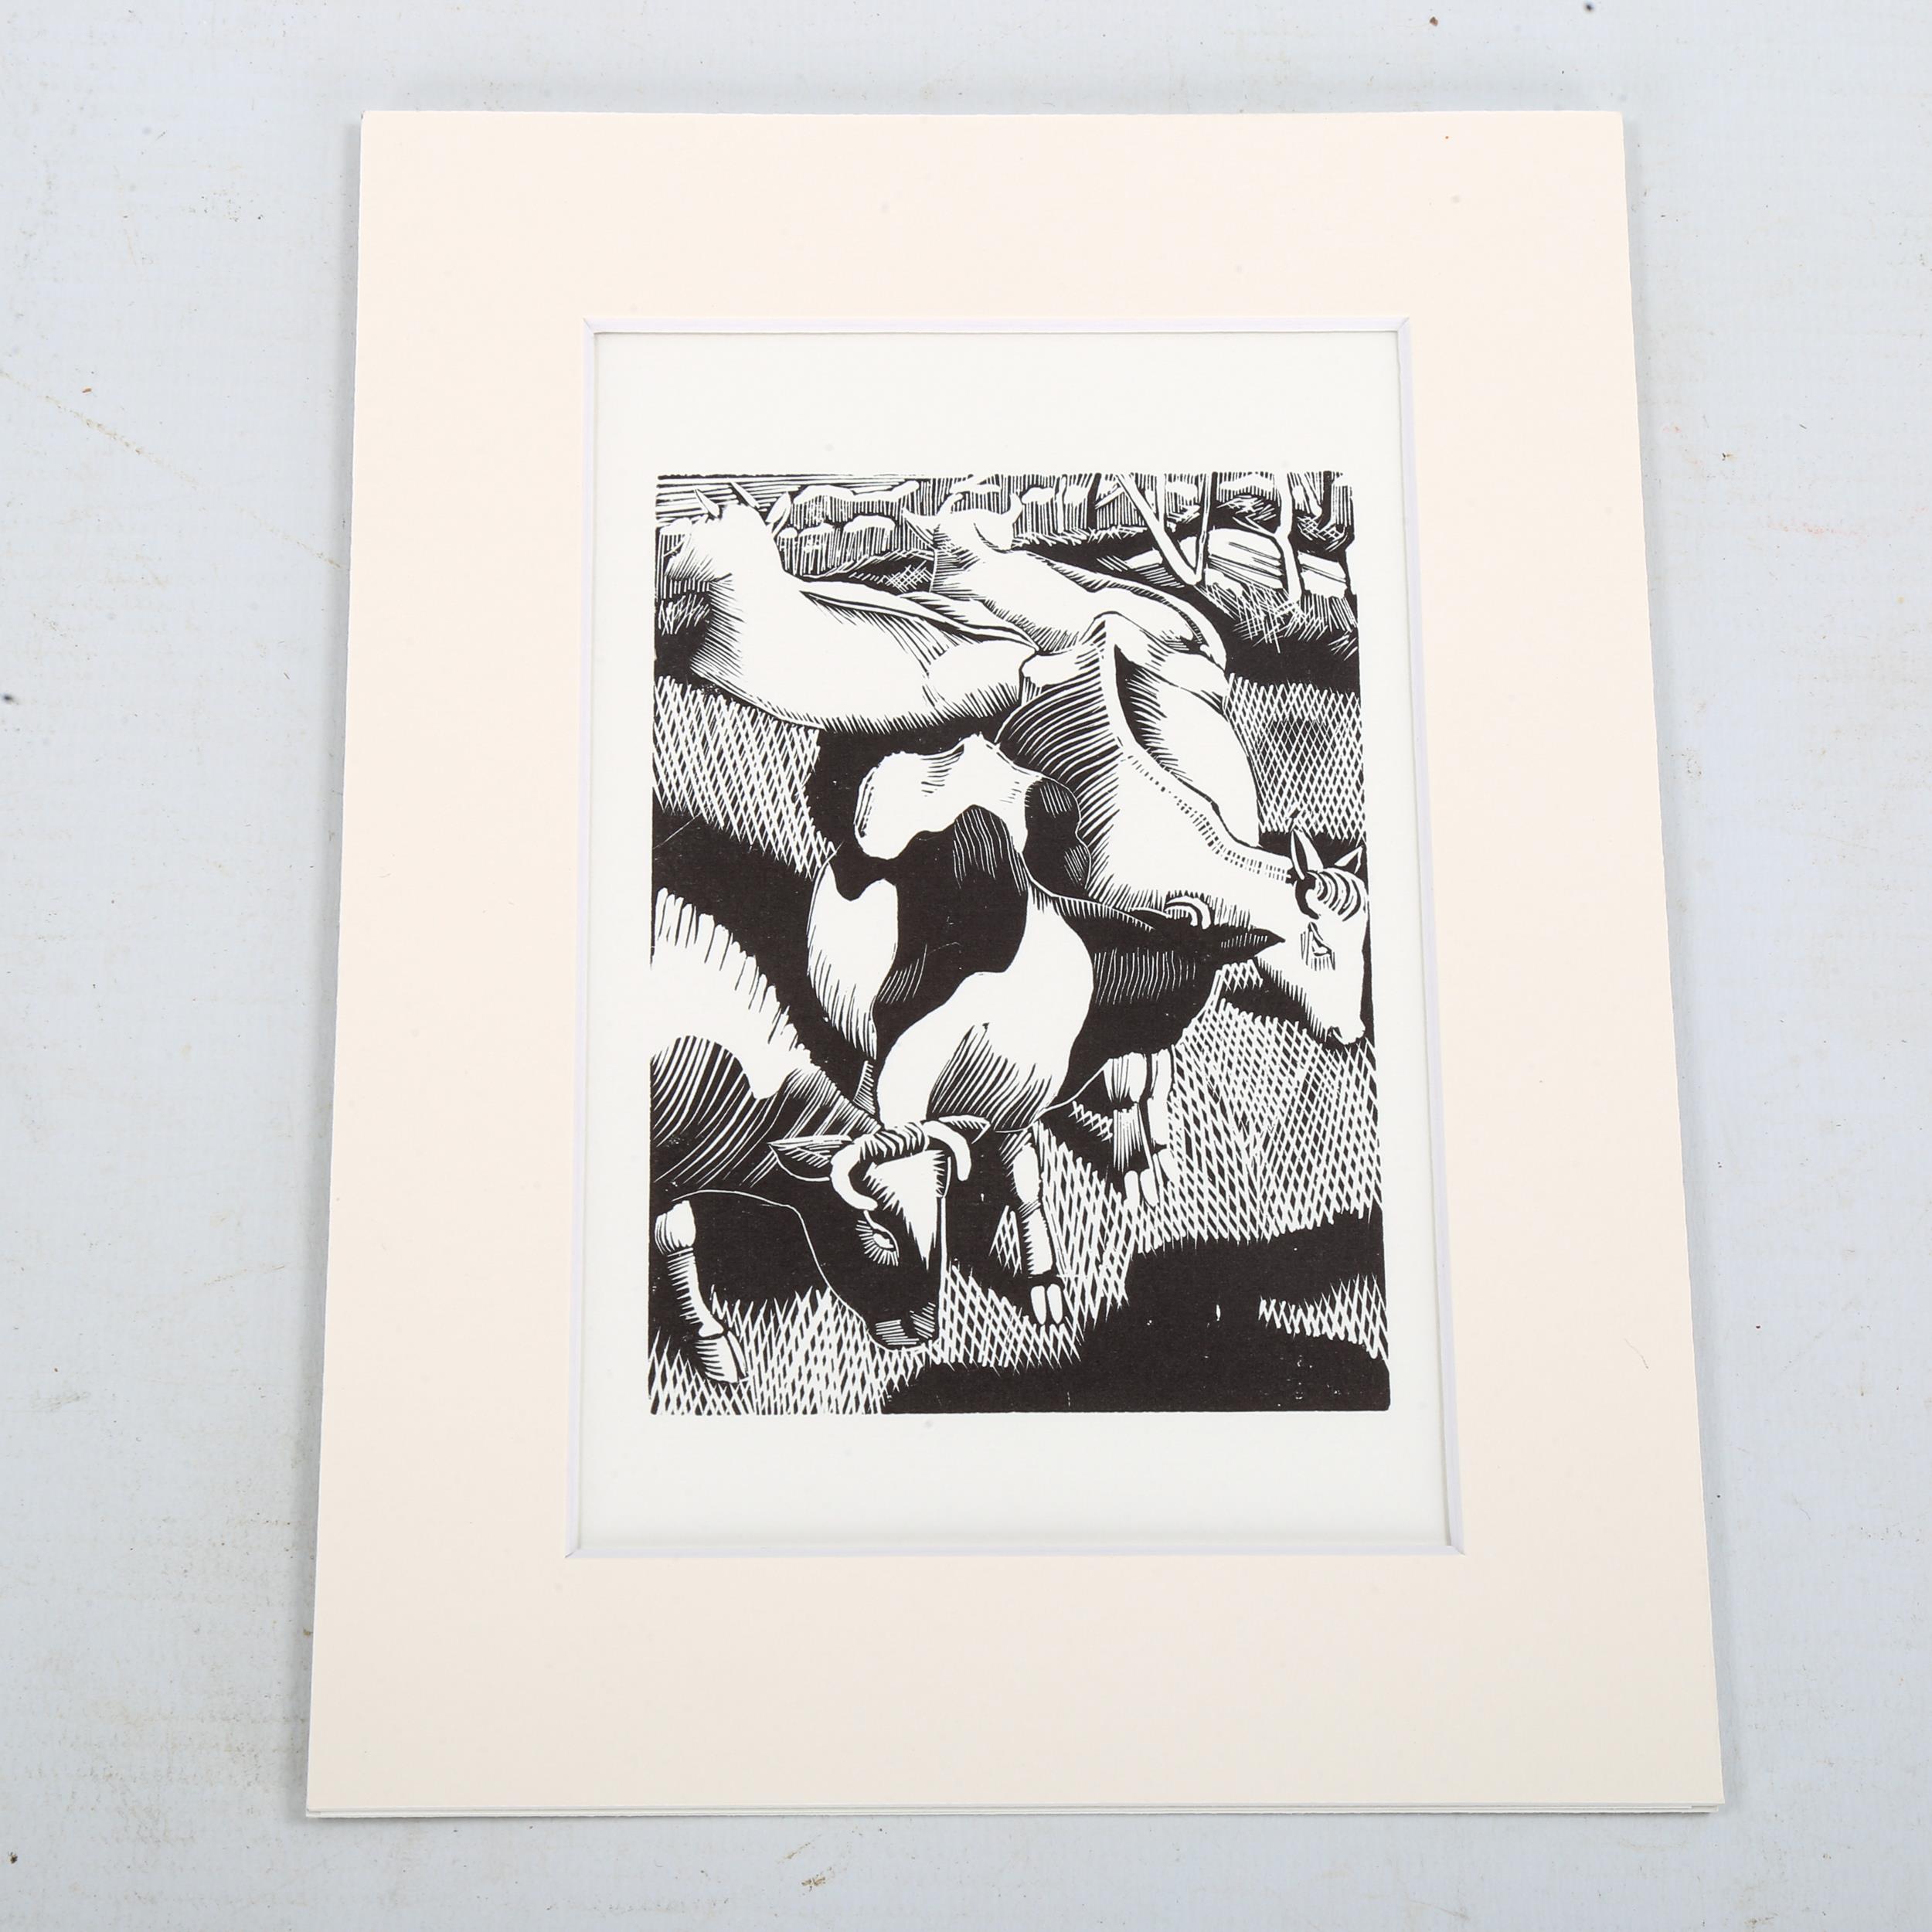 John Nash (1893 - 1977), limited edition wood engraving on paper, cows, 1920, 11.5cm x 8.25cm, - Image 3 of 4